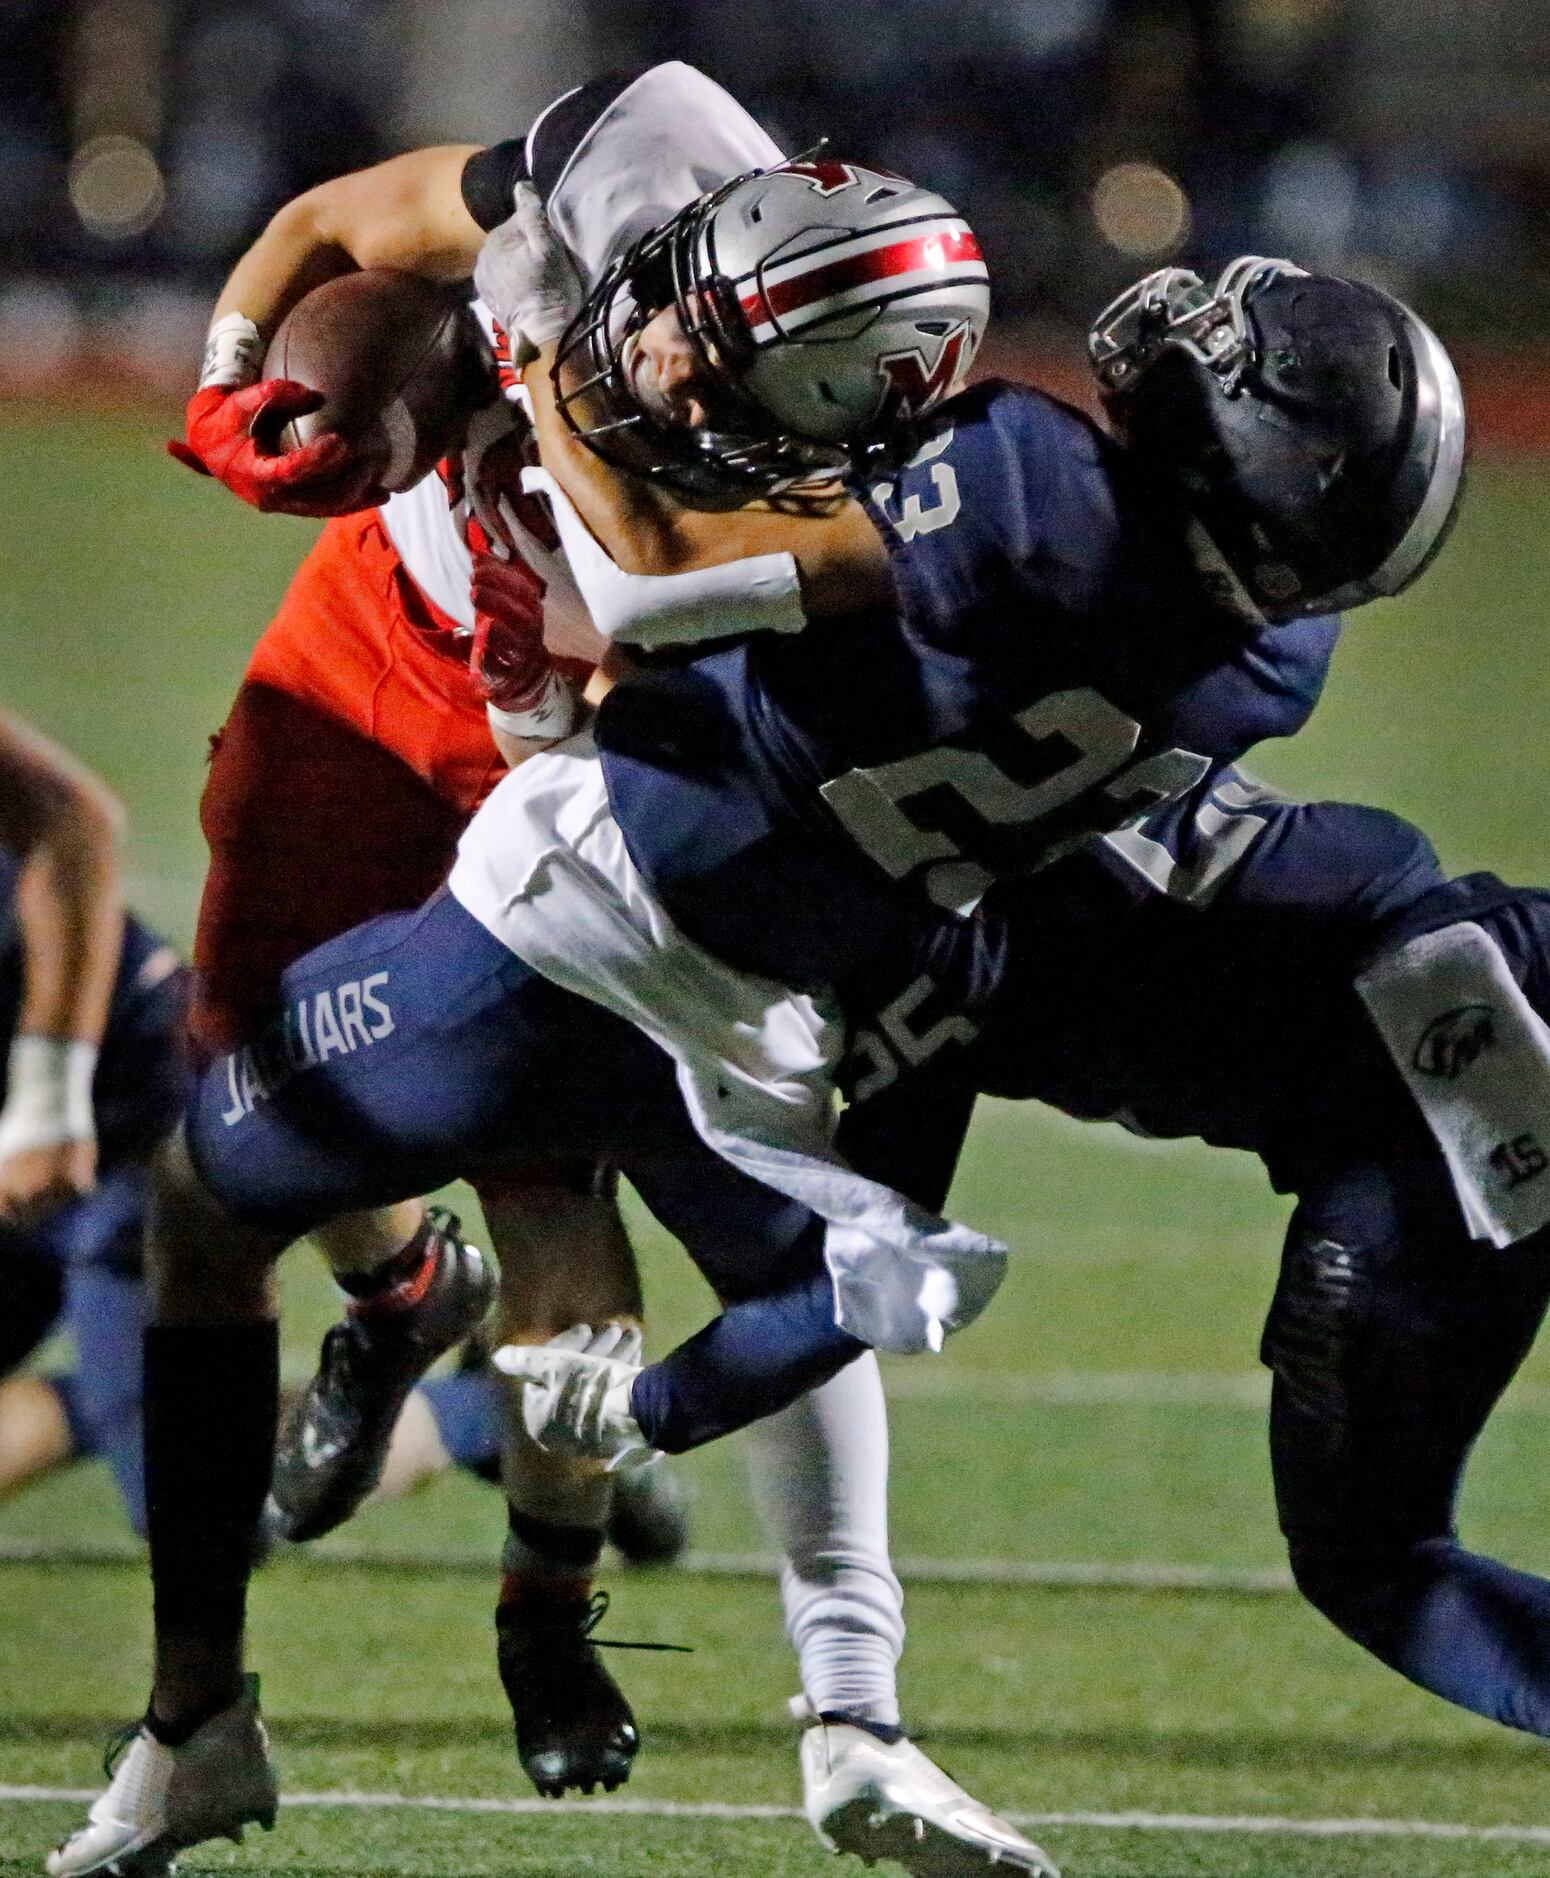 Flower Mound Marcus running back Gabe Espinoza (15) is tackled by Flower Mound High School...